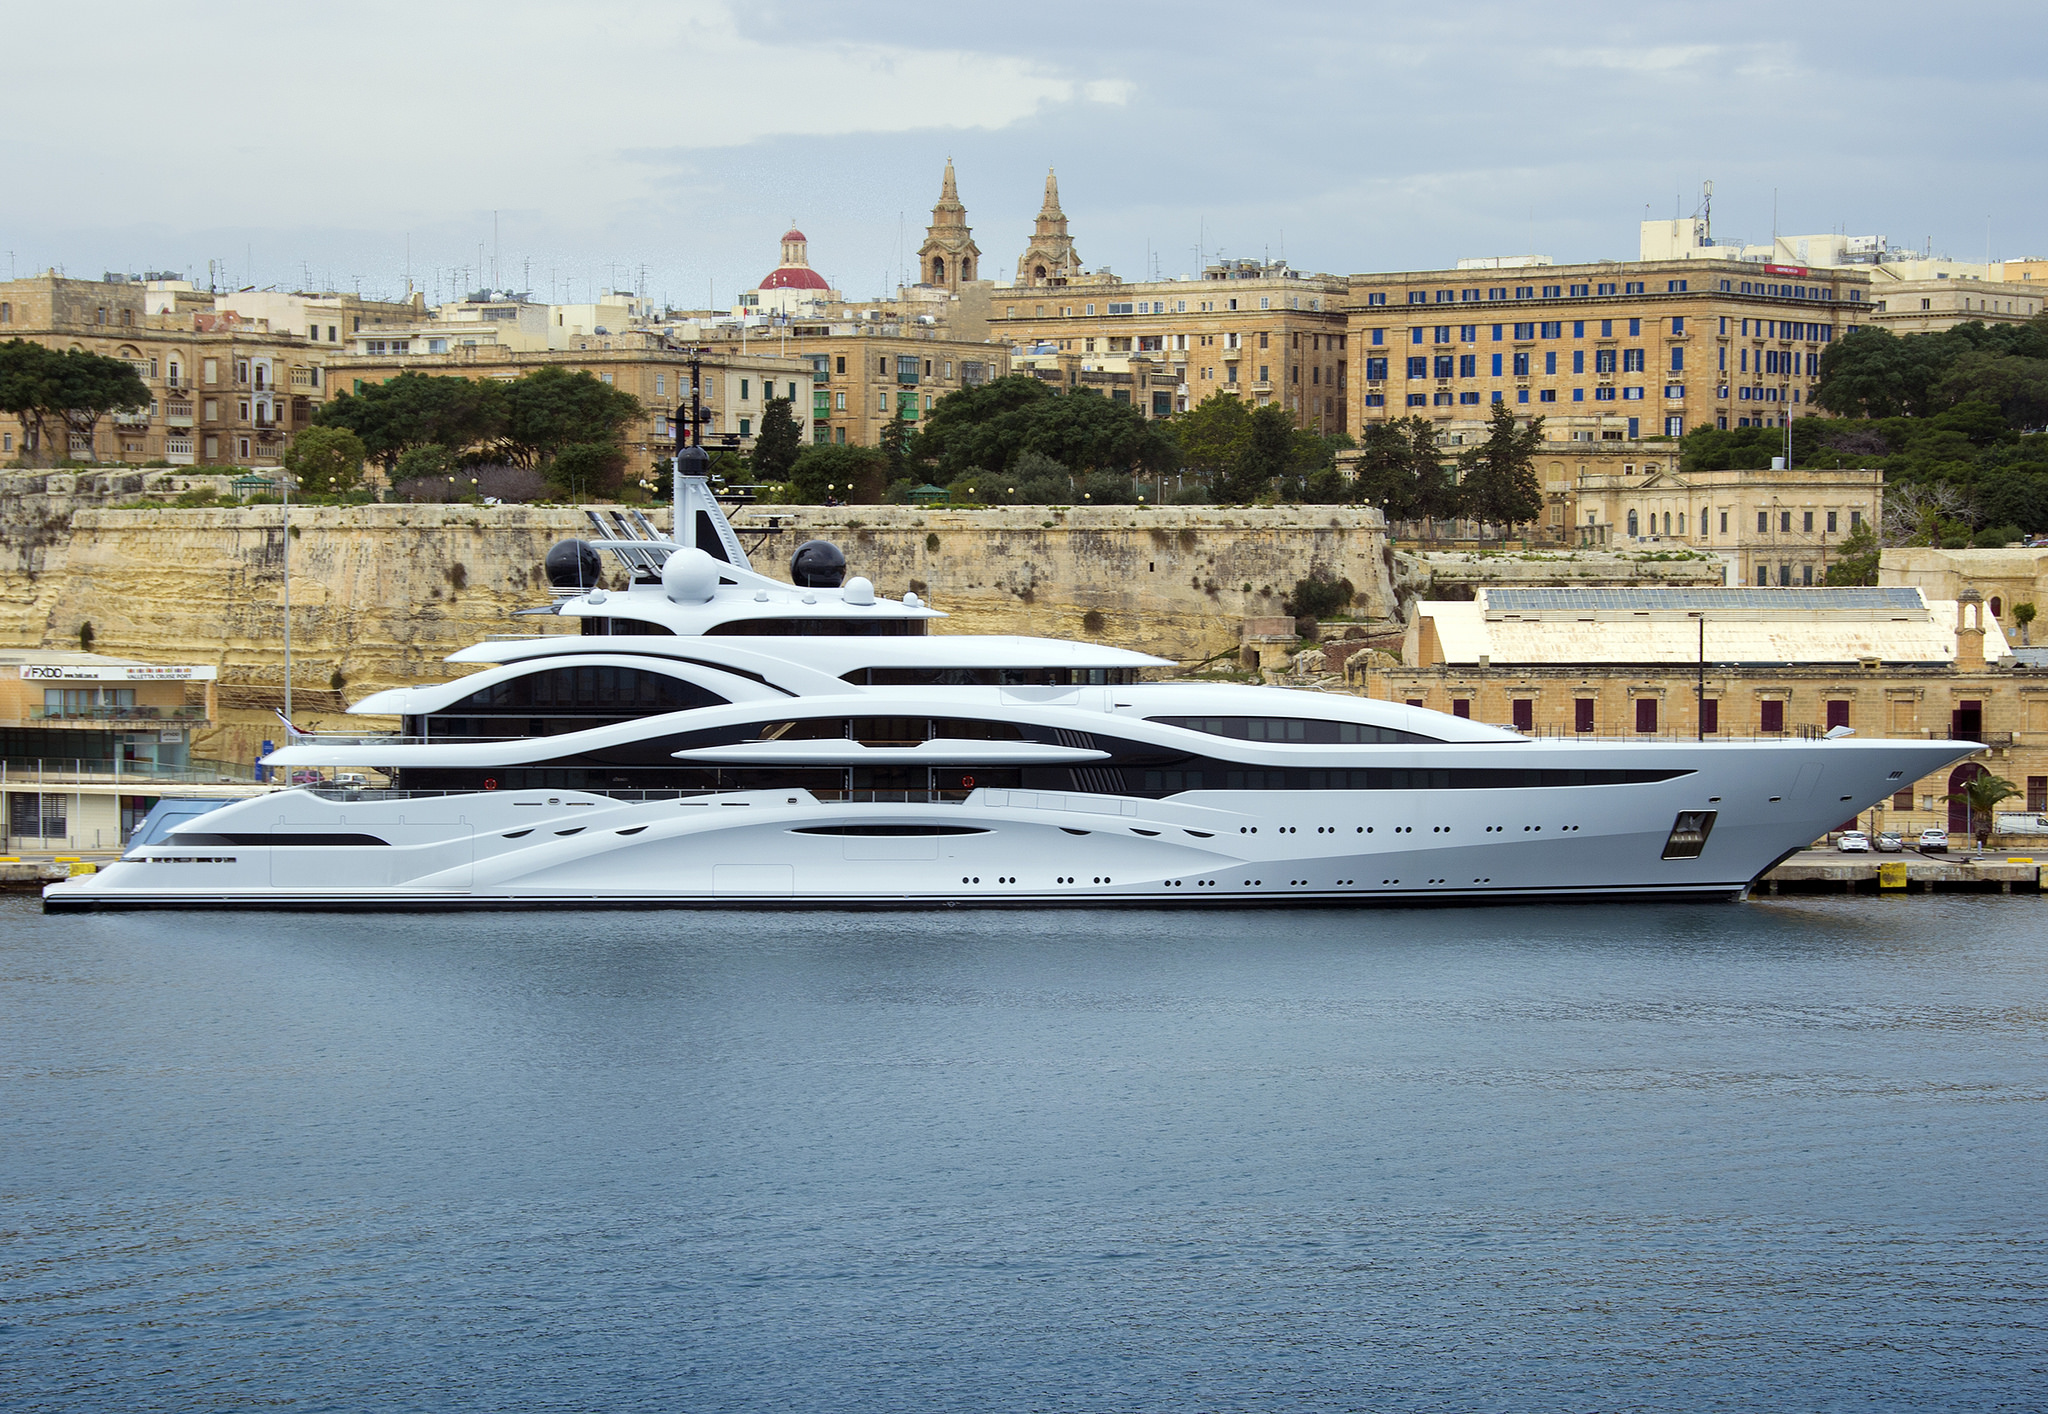 super yachts in malta today